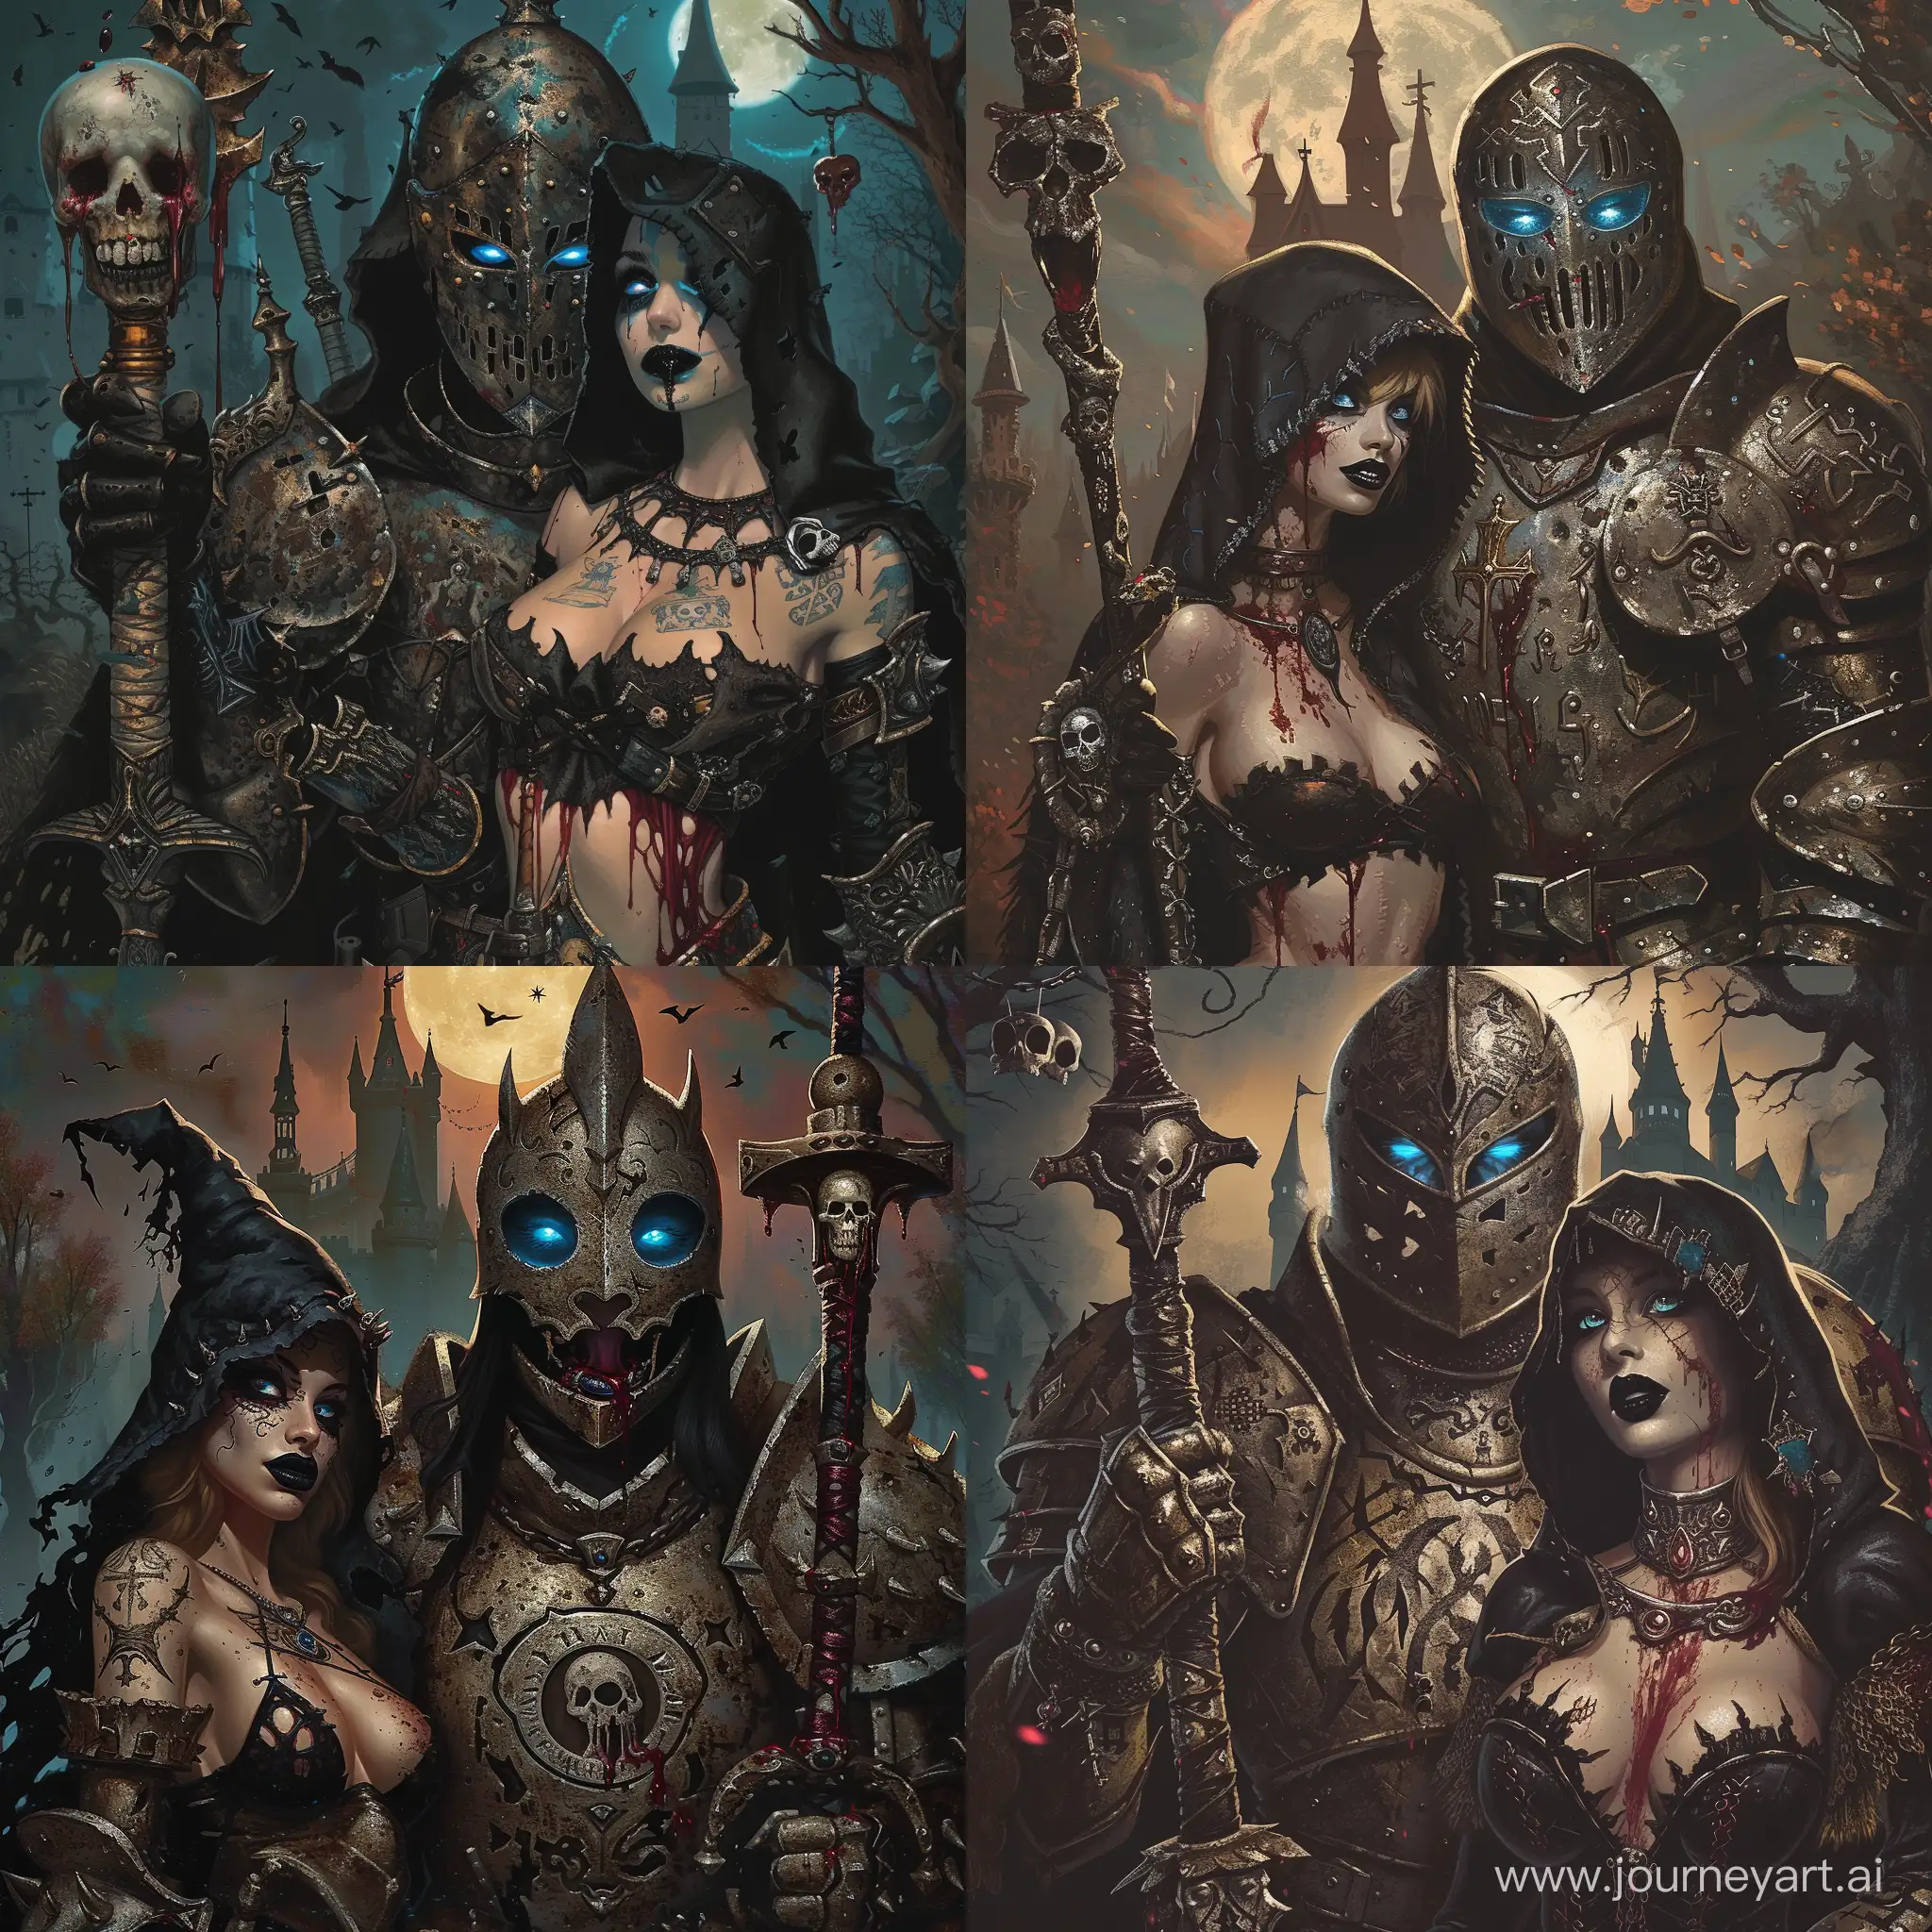 A cursed knight clad in tarnished, blackened armor adorned with ominous symbols, Haunting blue eyes that emanate a dim, eerie light, Carries a cursed, sentient sword that whispers malevolent secrets to him in the silence of the night, accompanied by a beautiful dark witch that have black lipstick, wears a dark hood and cleavage popping out, carries a staff with a skull on it crying blood, dark castle on the background, blood moon in the sky, 1970's dark fantasy style, grim dark, gritty, detailed